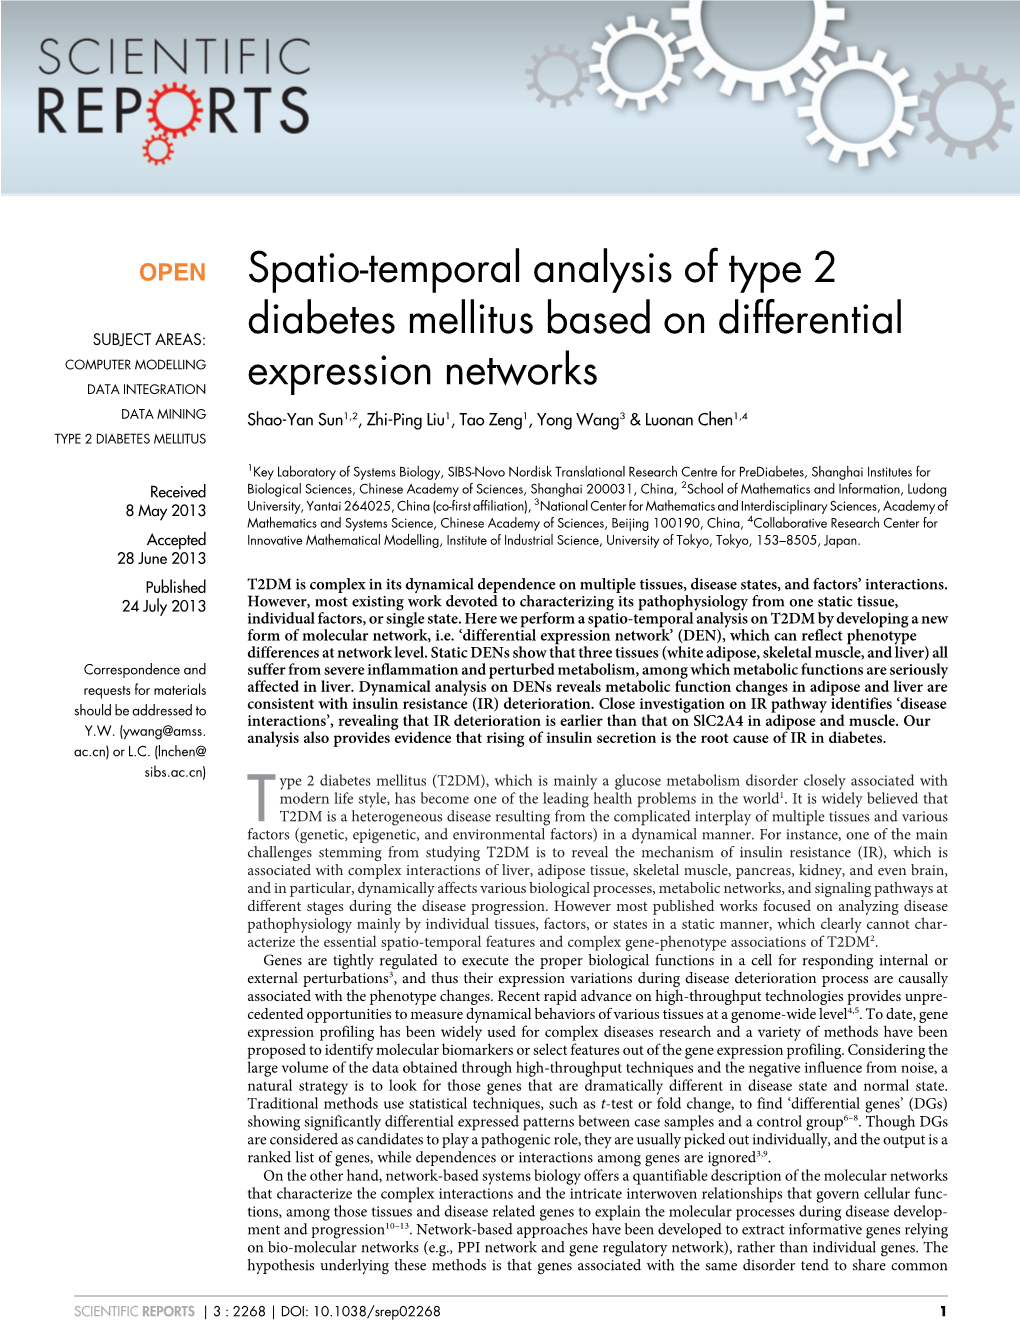 Spatio-Temporal Analysis of Type 2 Diabetes Mellitus Based on Differential Expression Networks